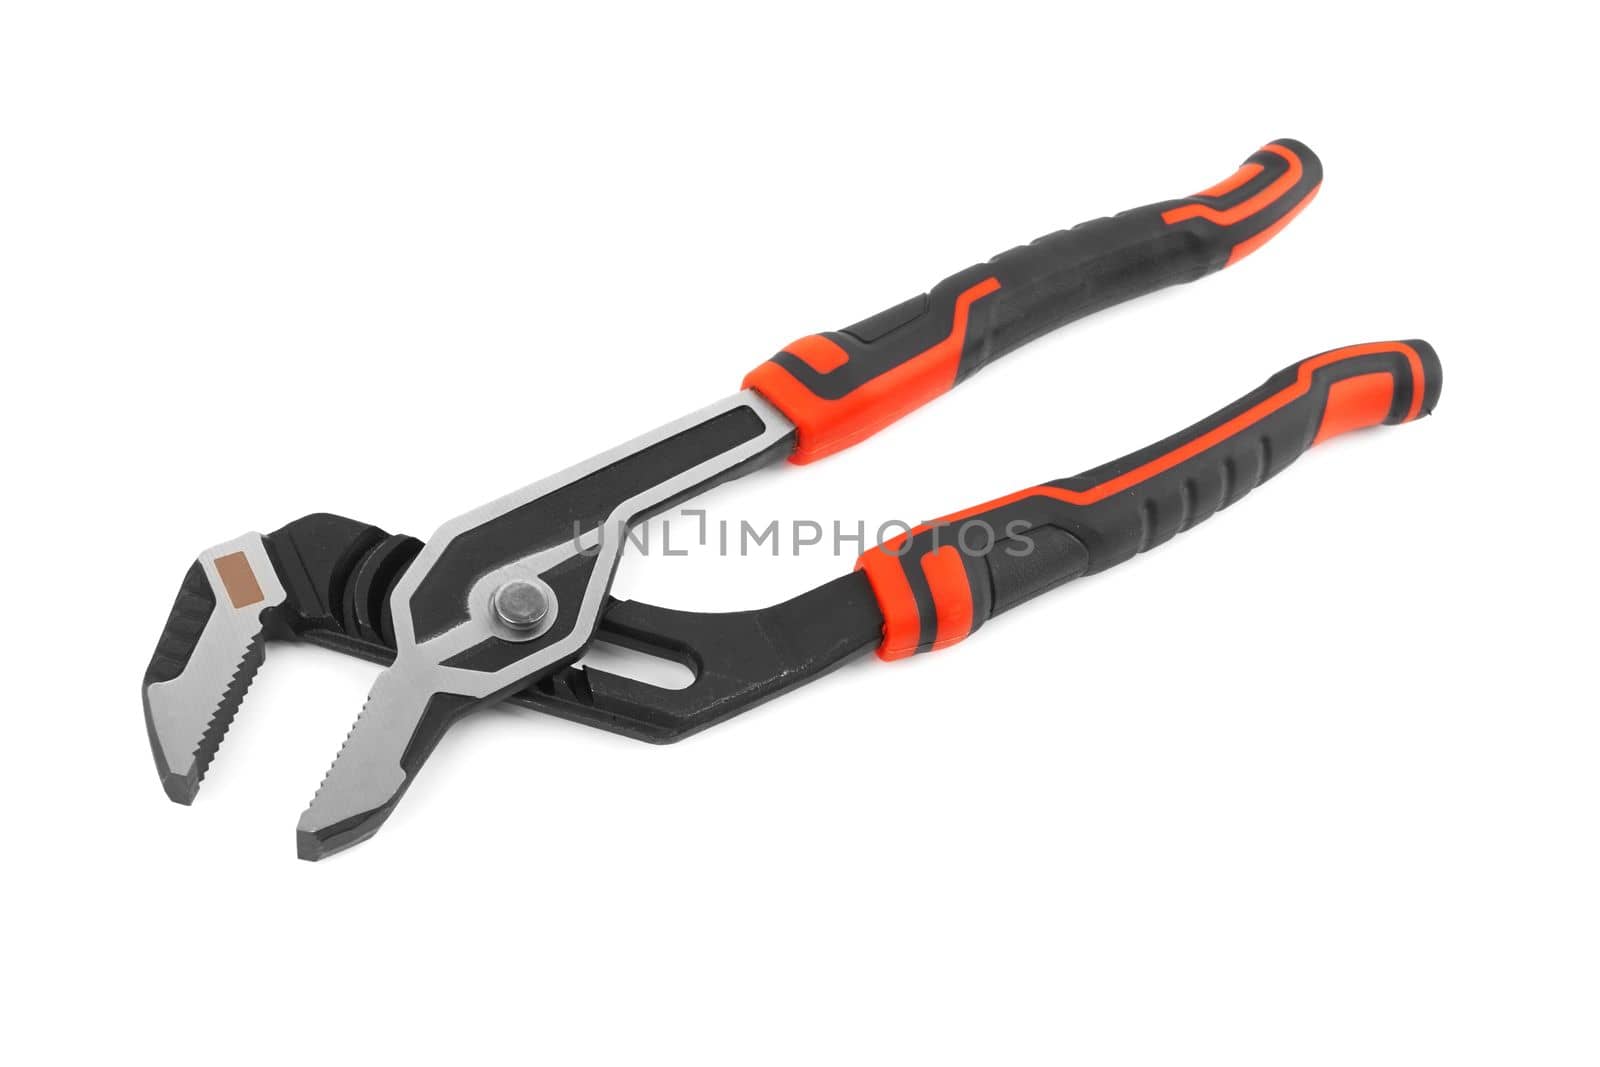 Pump pliers work tool or slip joint pliers isolated cut out on white background